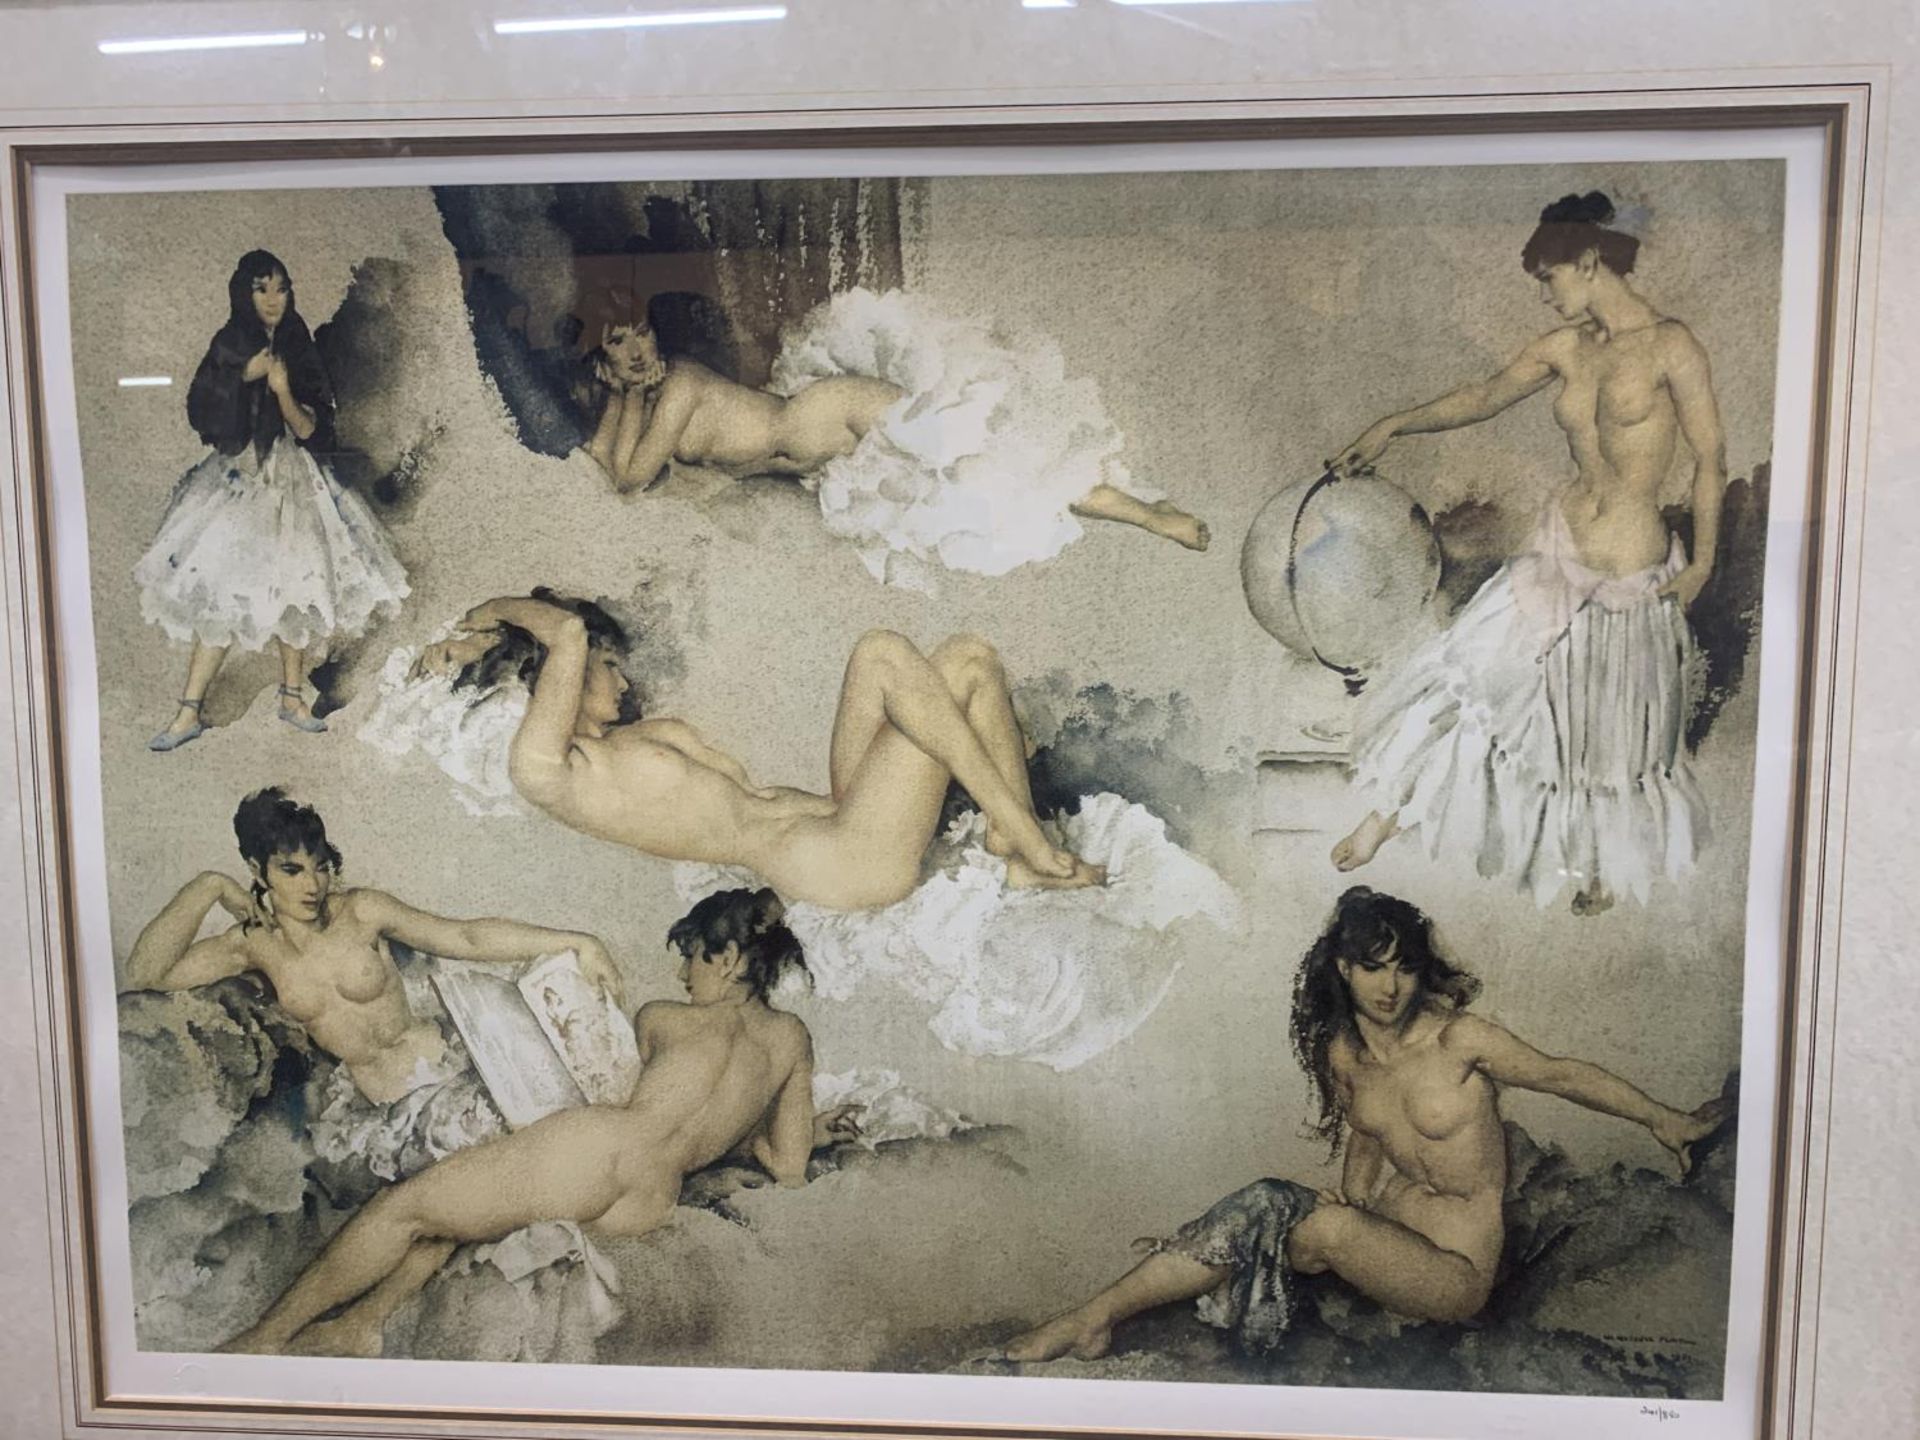 A LARGE GILT FRAMED SIR WILLIAM RUSSEL FLINT PRINT OF NUDE LADIES 'VARIATIONS', NUMBERED 241/850, - Image 2 of 3